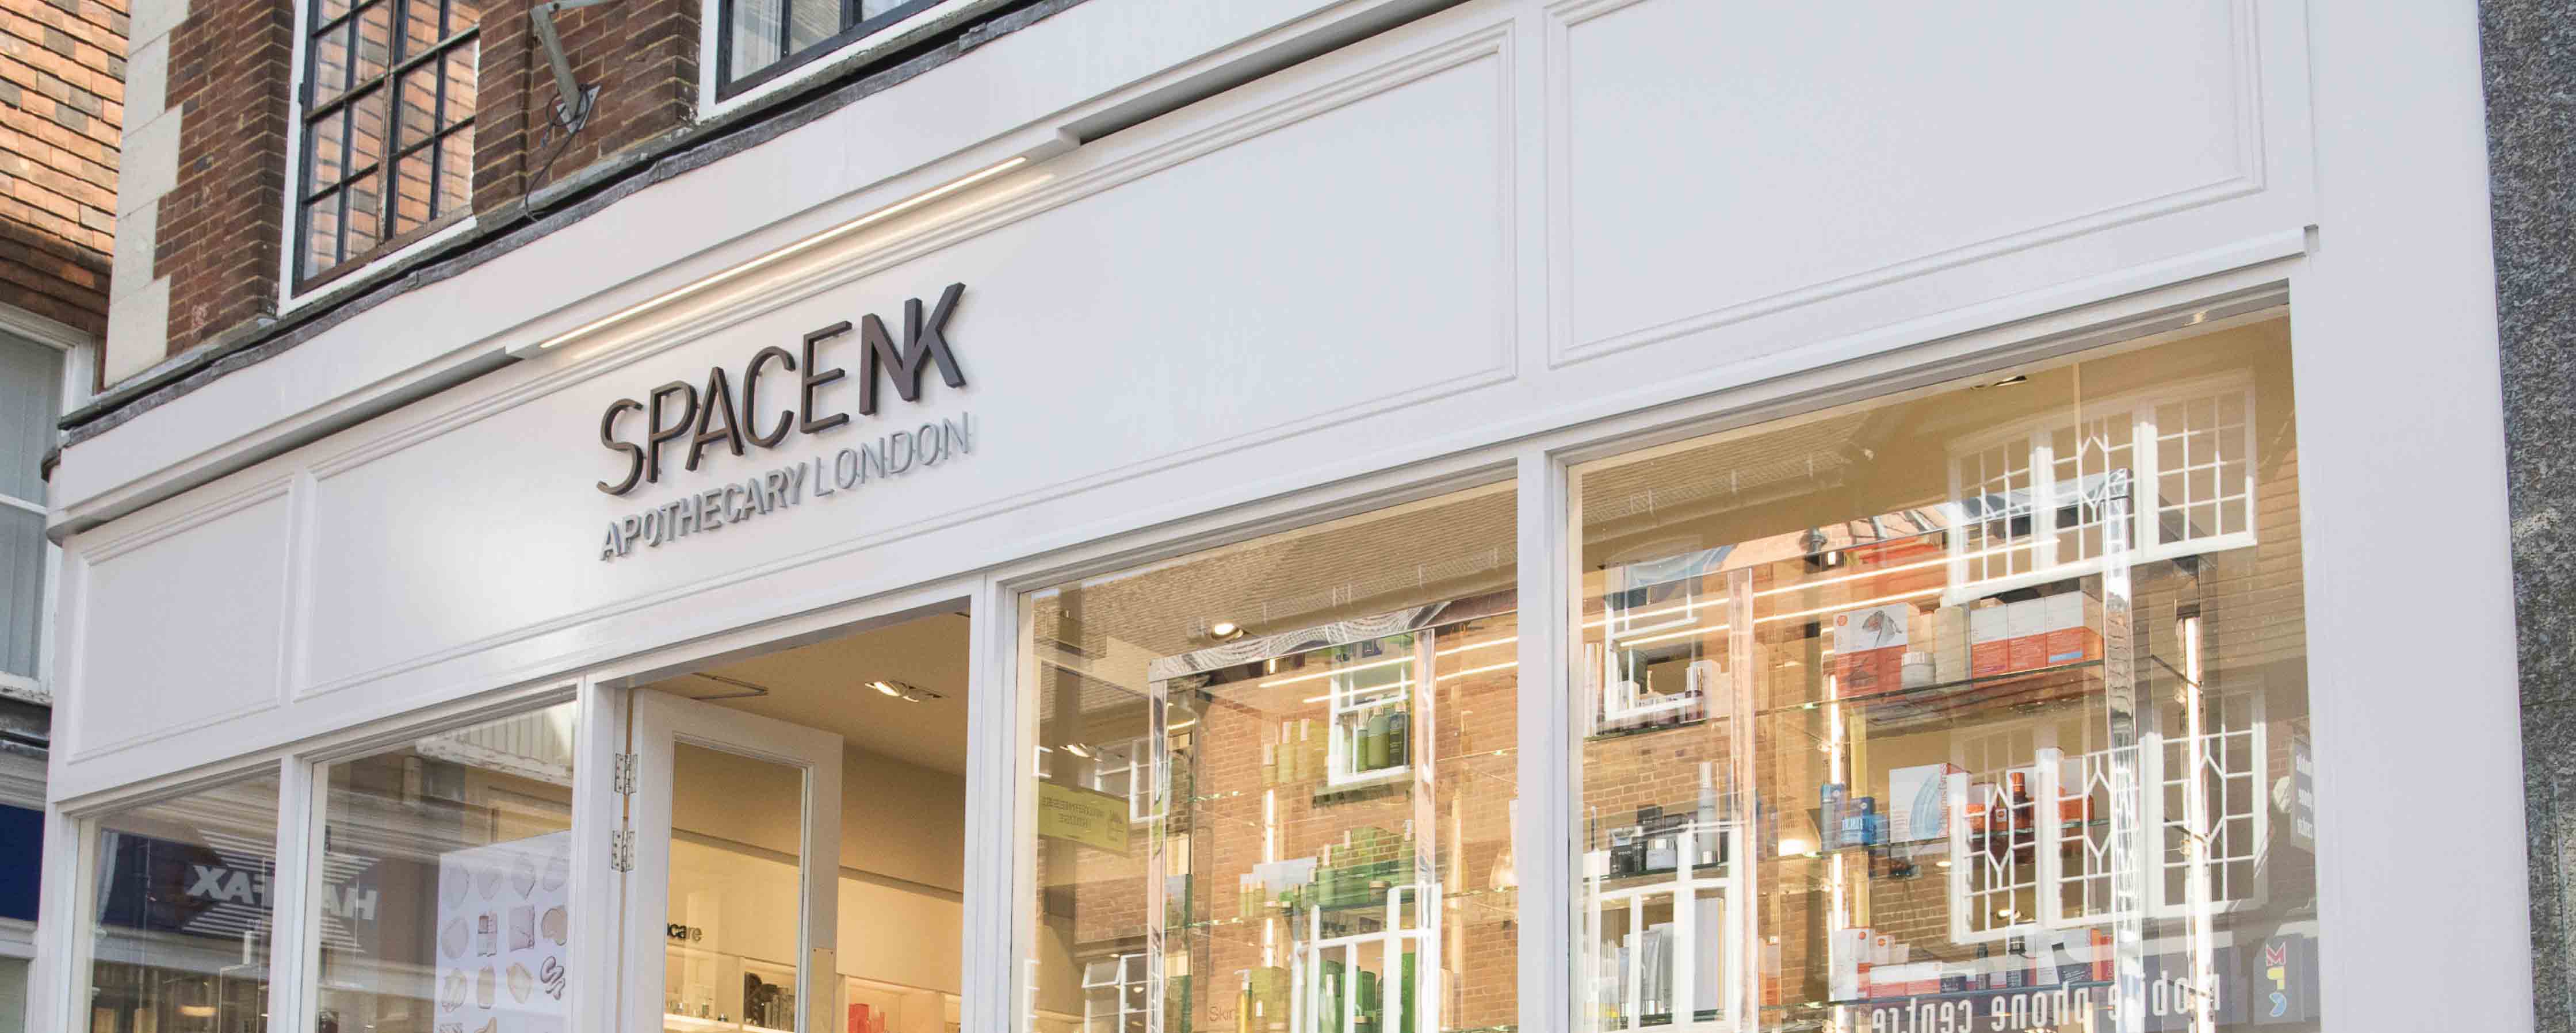 Space NK signs for Leeds relocation to Trinity - Retail 